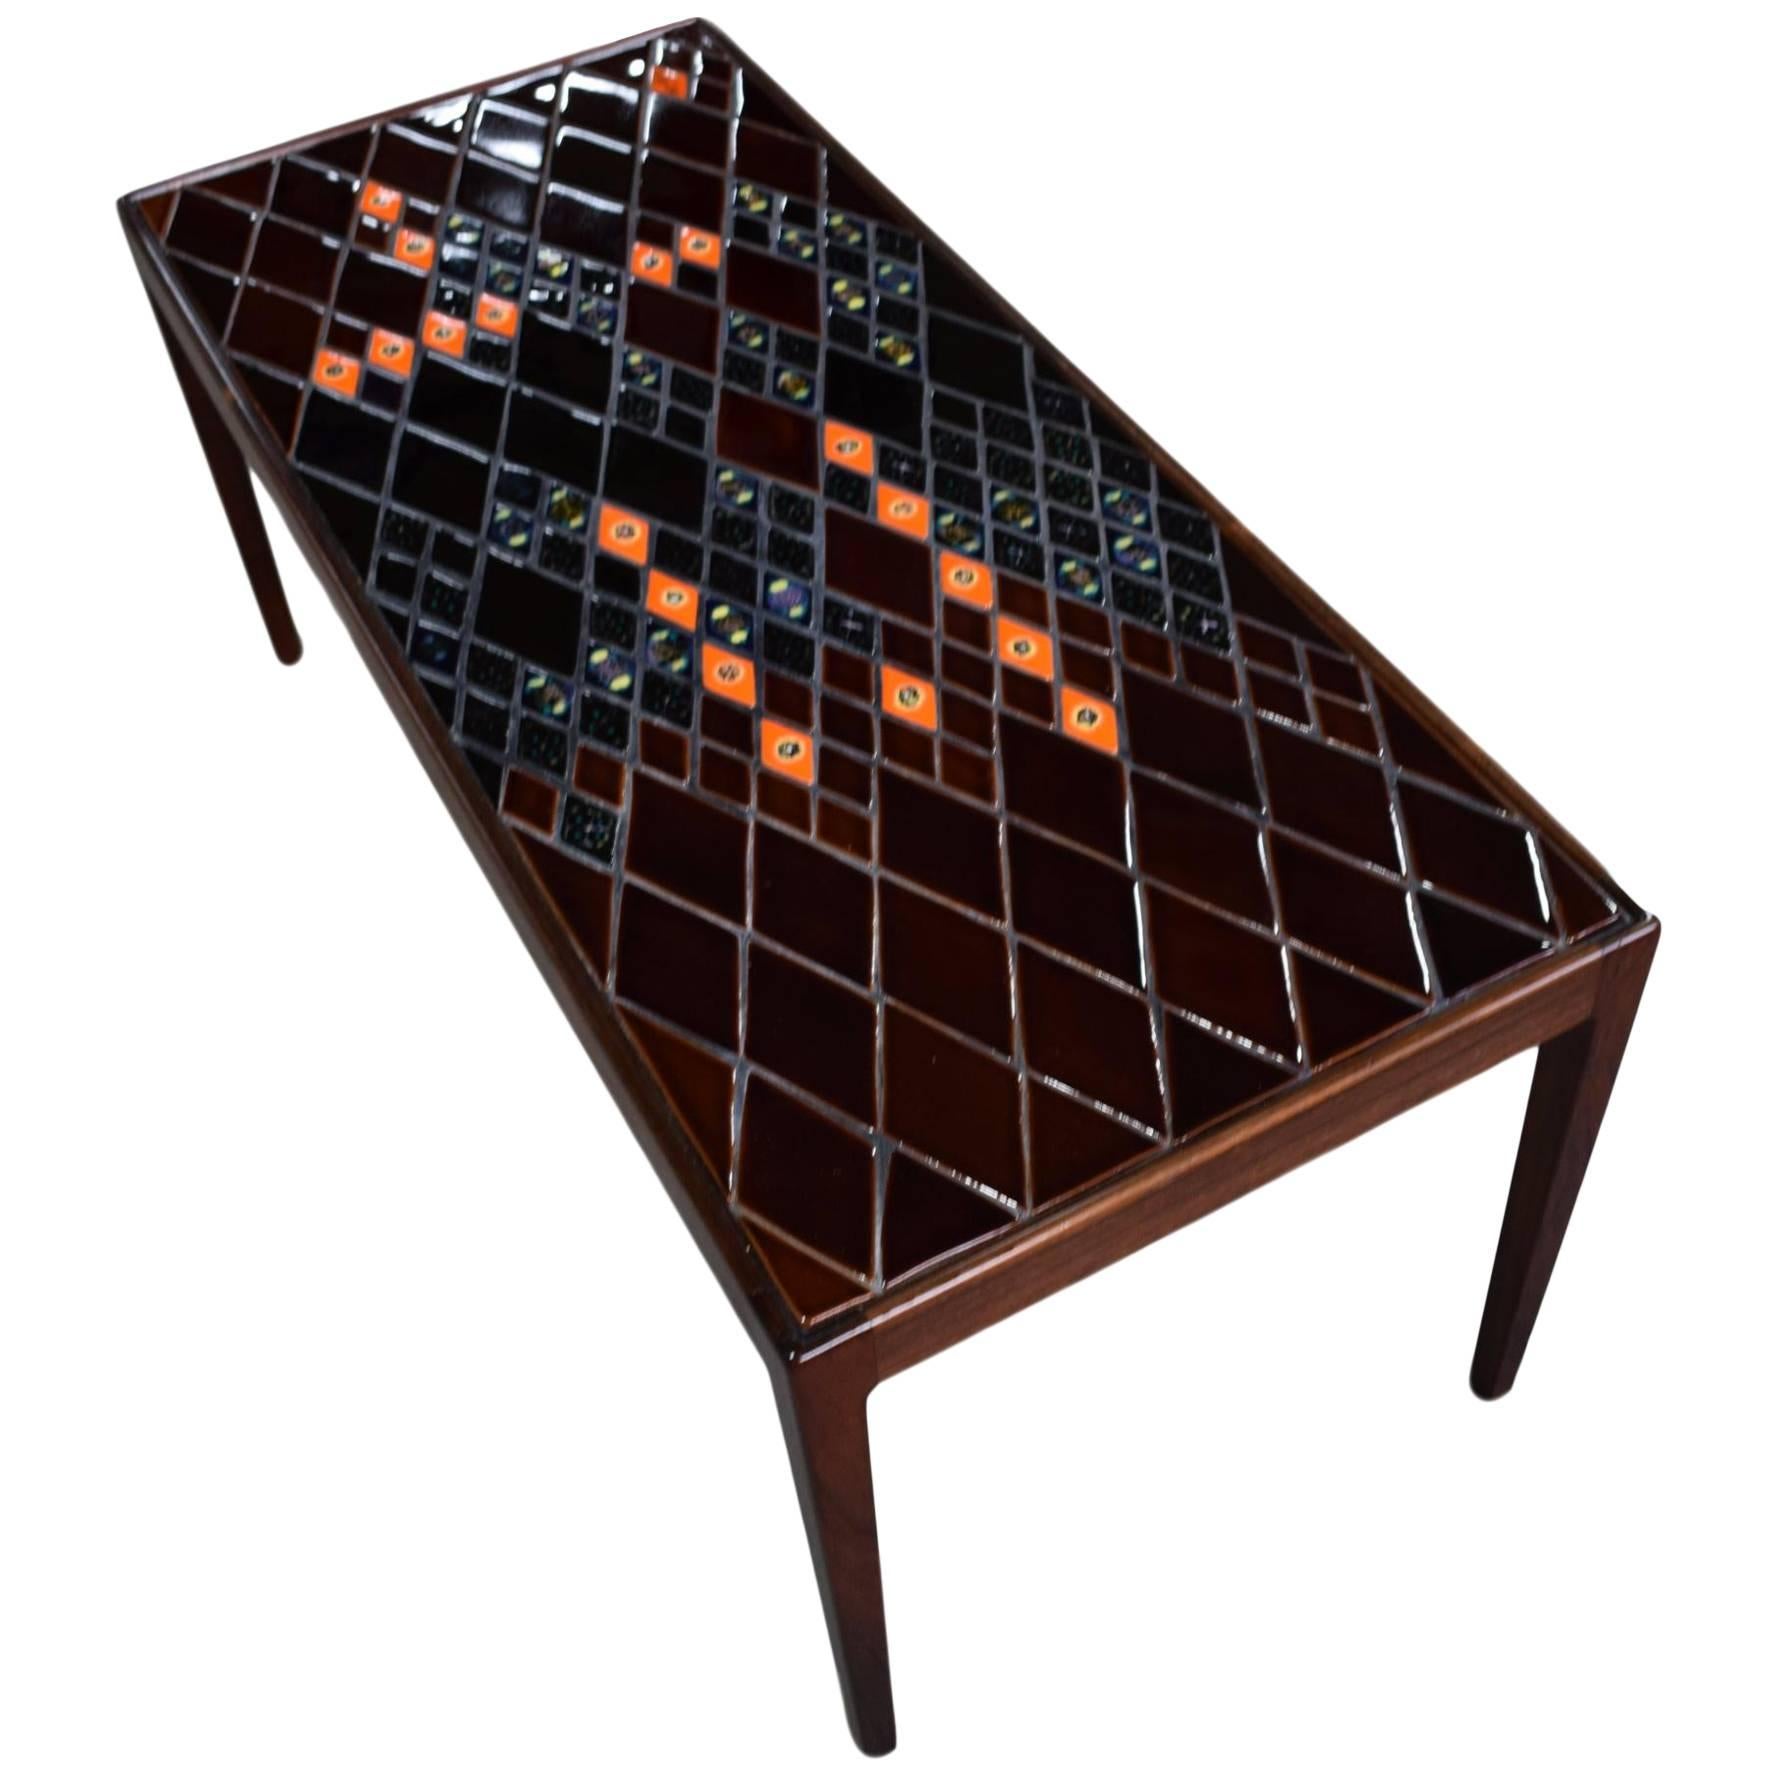 Danish Midcentury Rosewood Coffee Table with Decorative Tiles by Bjørn Wiinblad For Sale